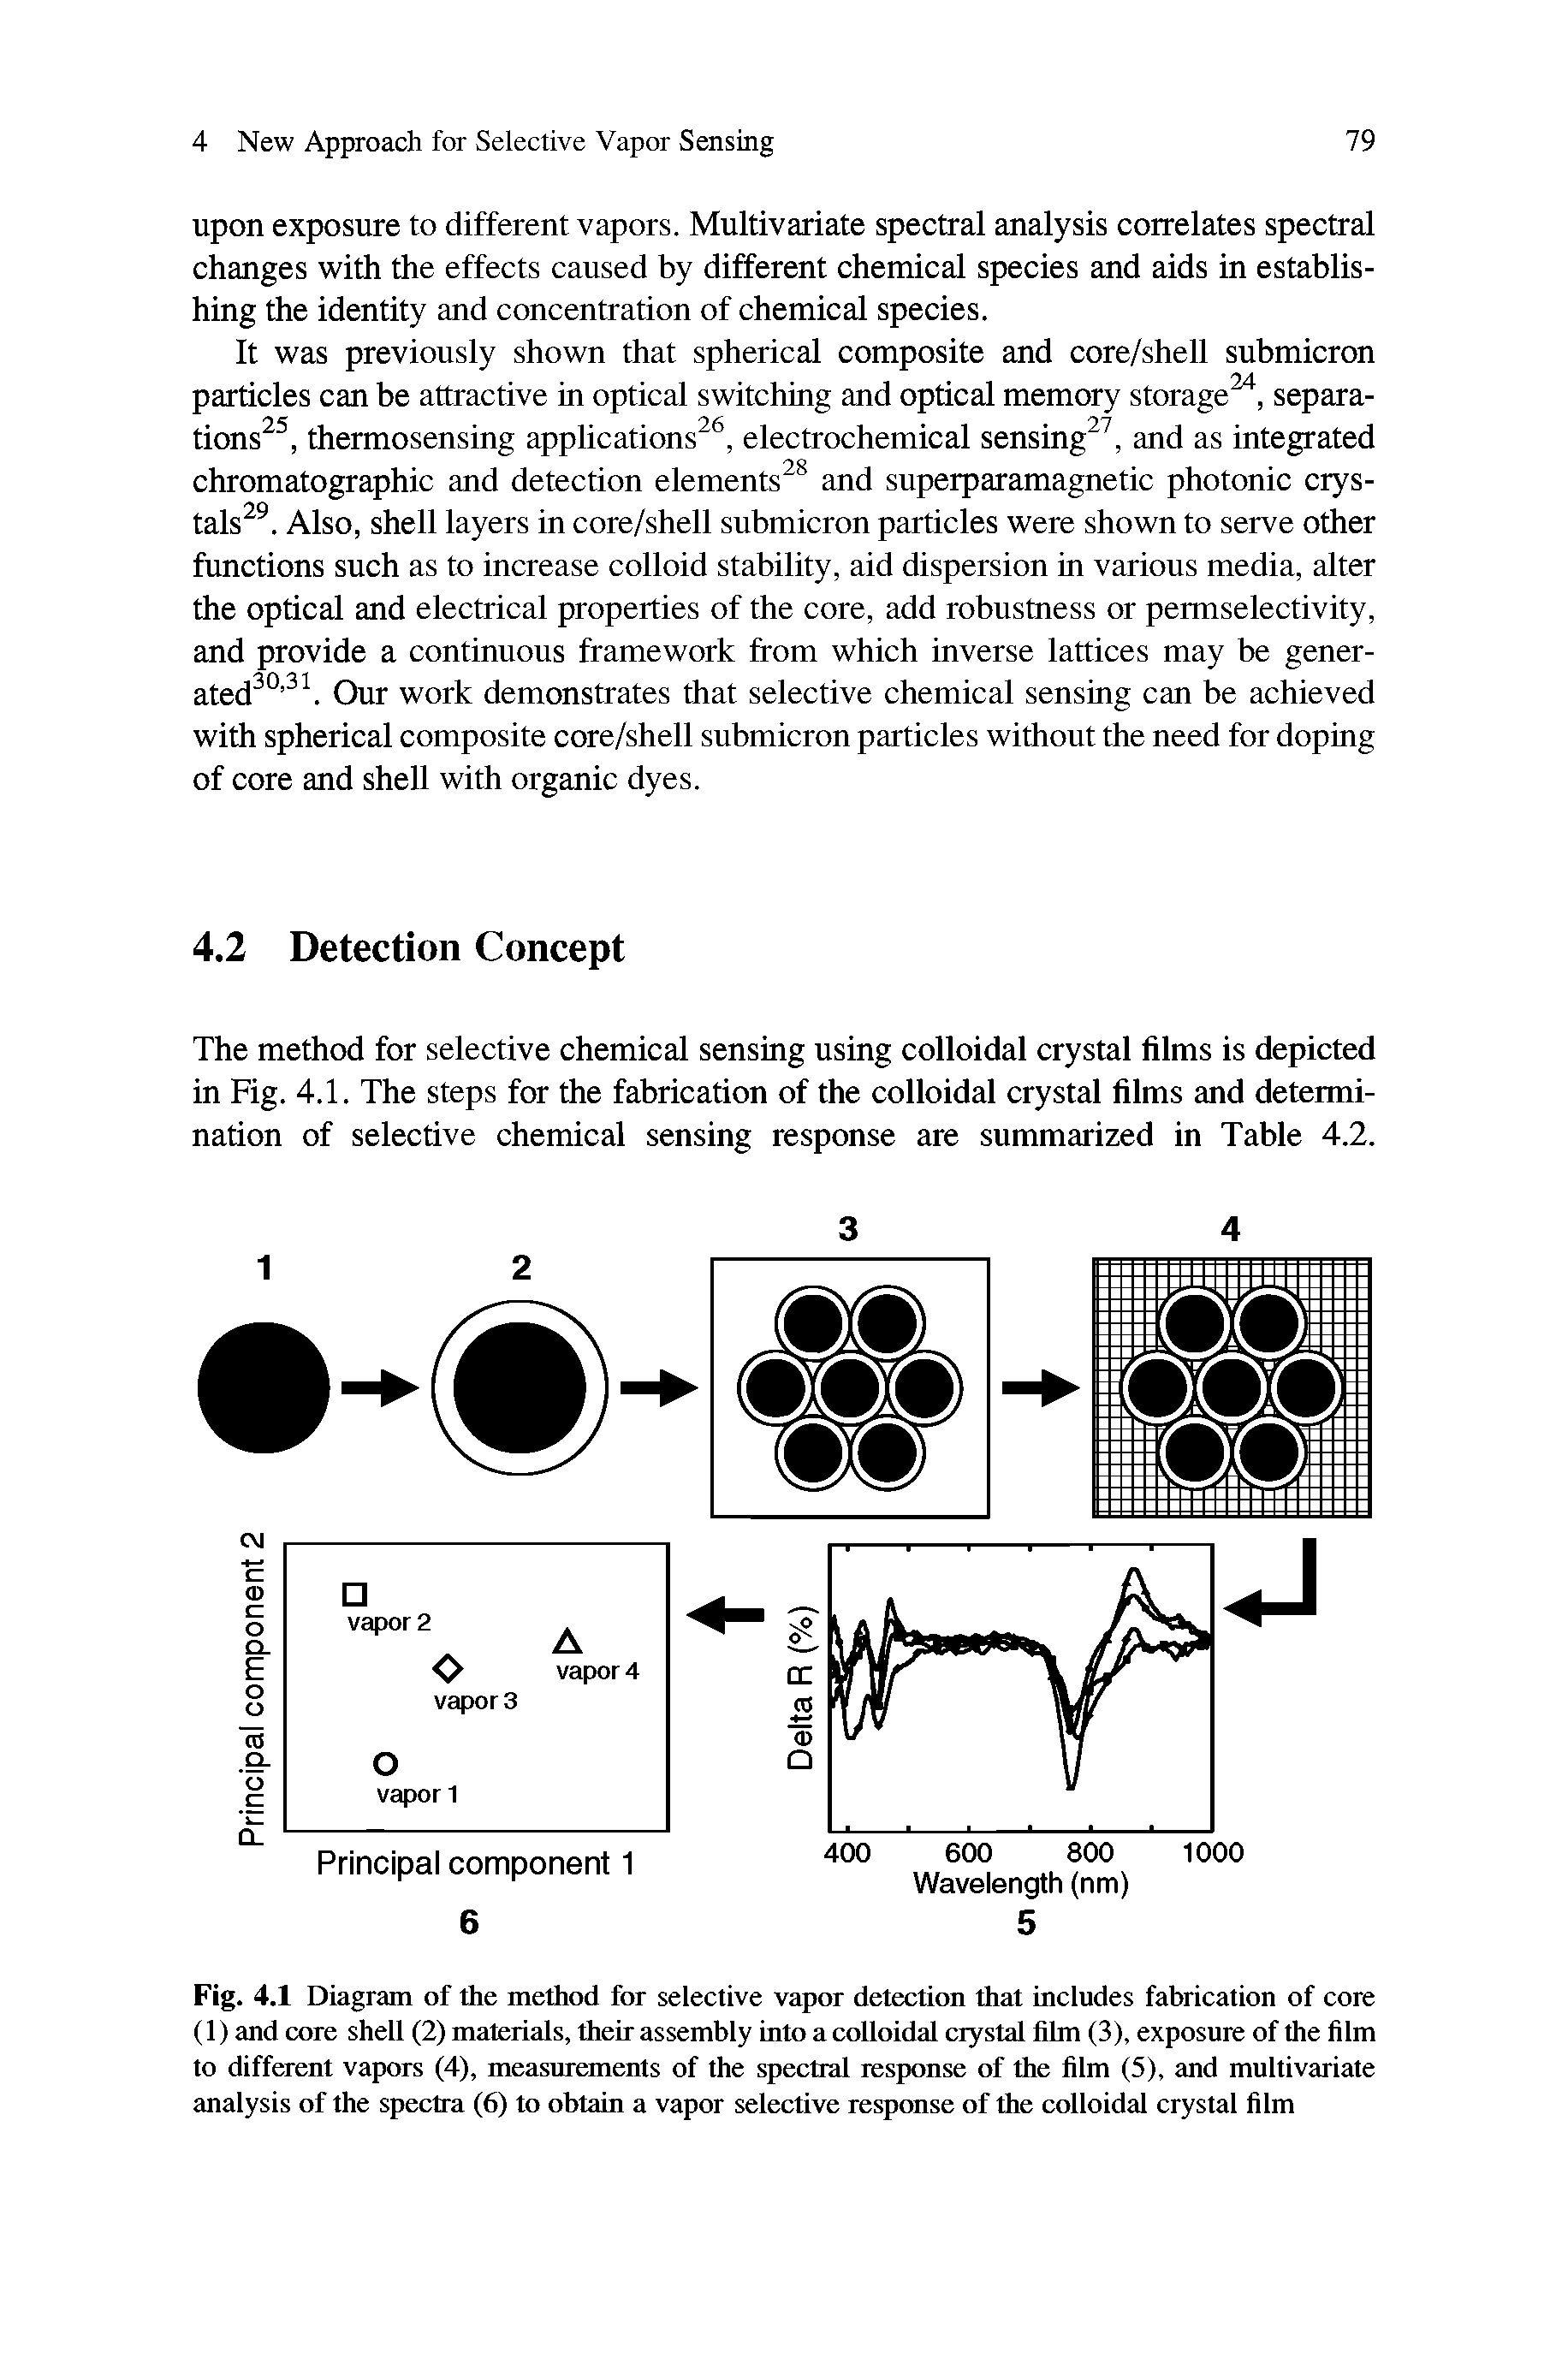 Fig. 4.1 Diagram of the method for selective vapor detection that includes fabrication of core (1) and core shell (2) materials, their assembly into a colloidal crystal film (3), exposure of the film to different vapors (4), measurements of the spectral response of the film (5), and multivariate analysis of the spectra (6) to obtain a vapor selective response of the colloidal crystal film...